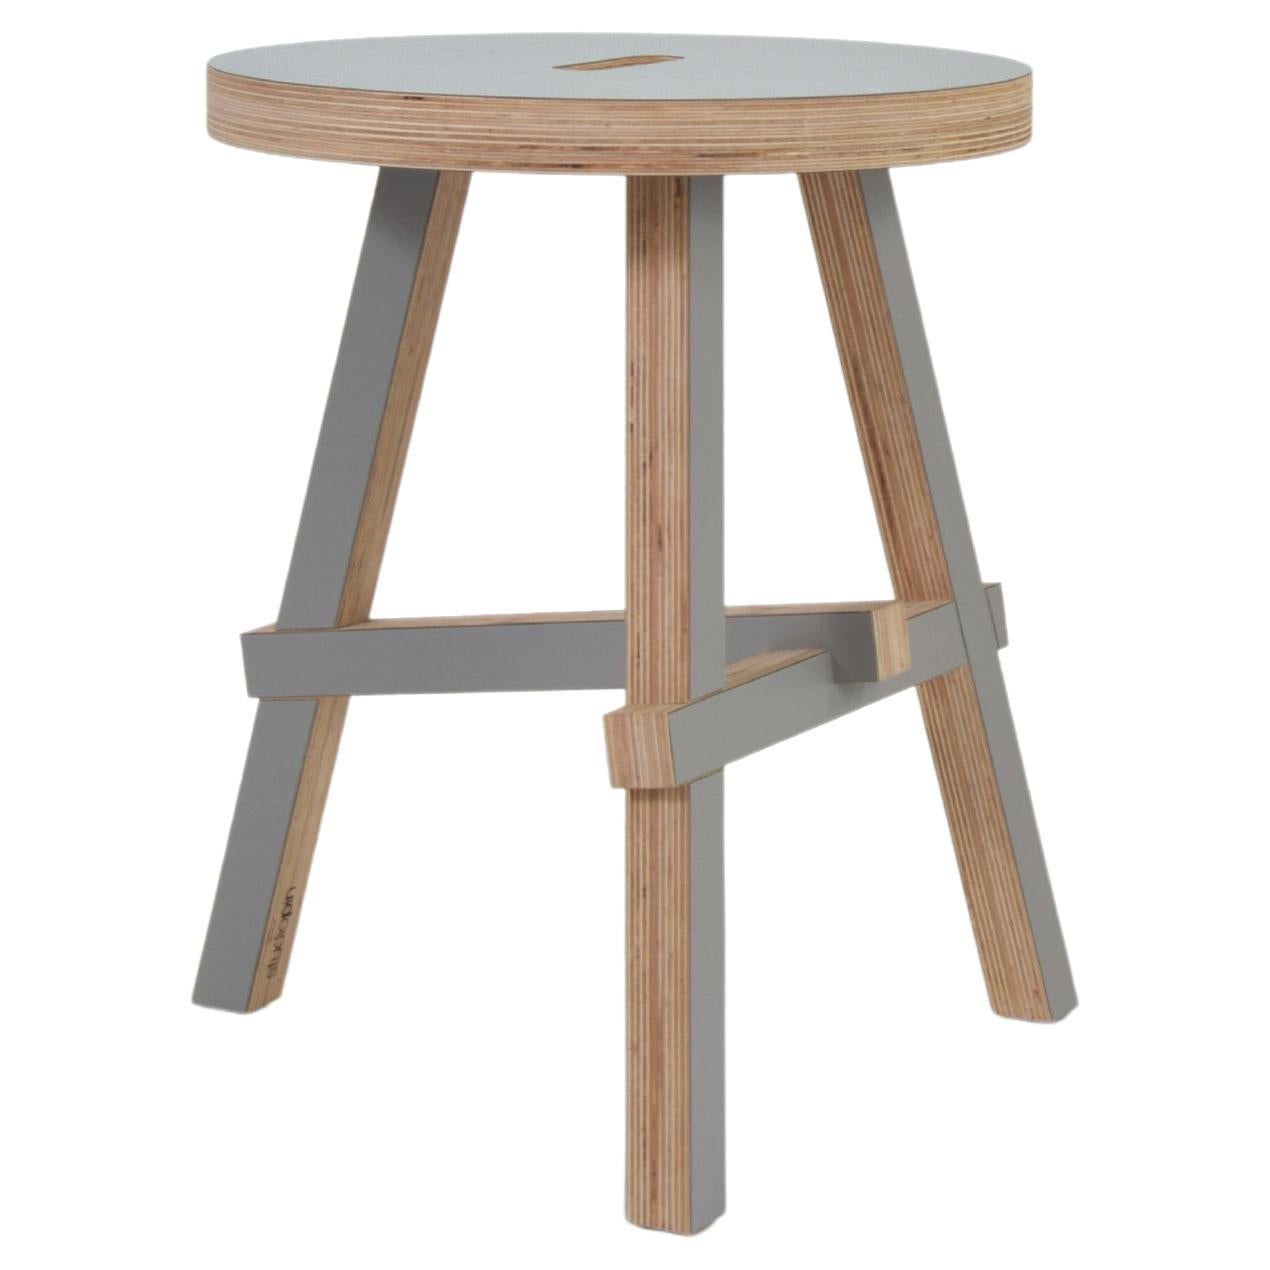 Coin Slot Gulden Stool by Studio Pin For Sale